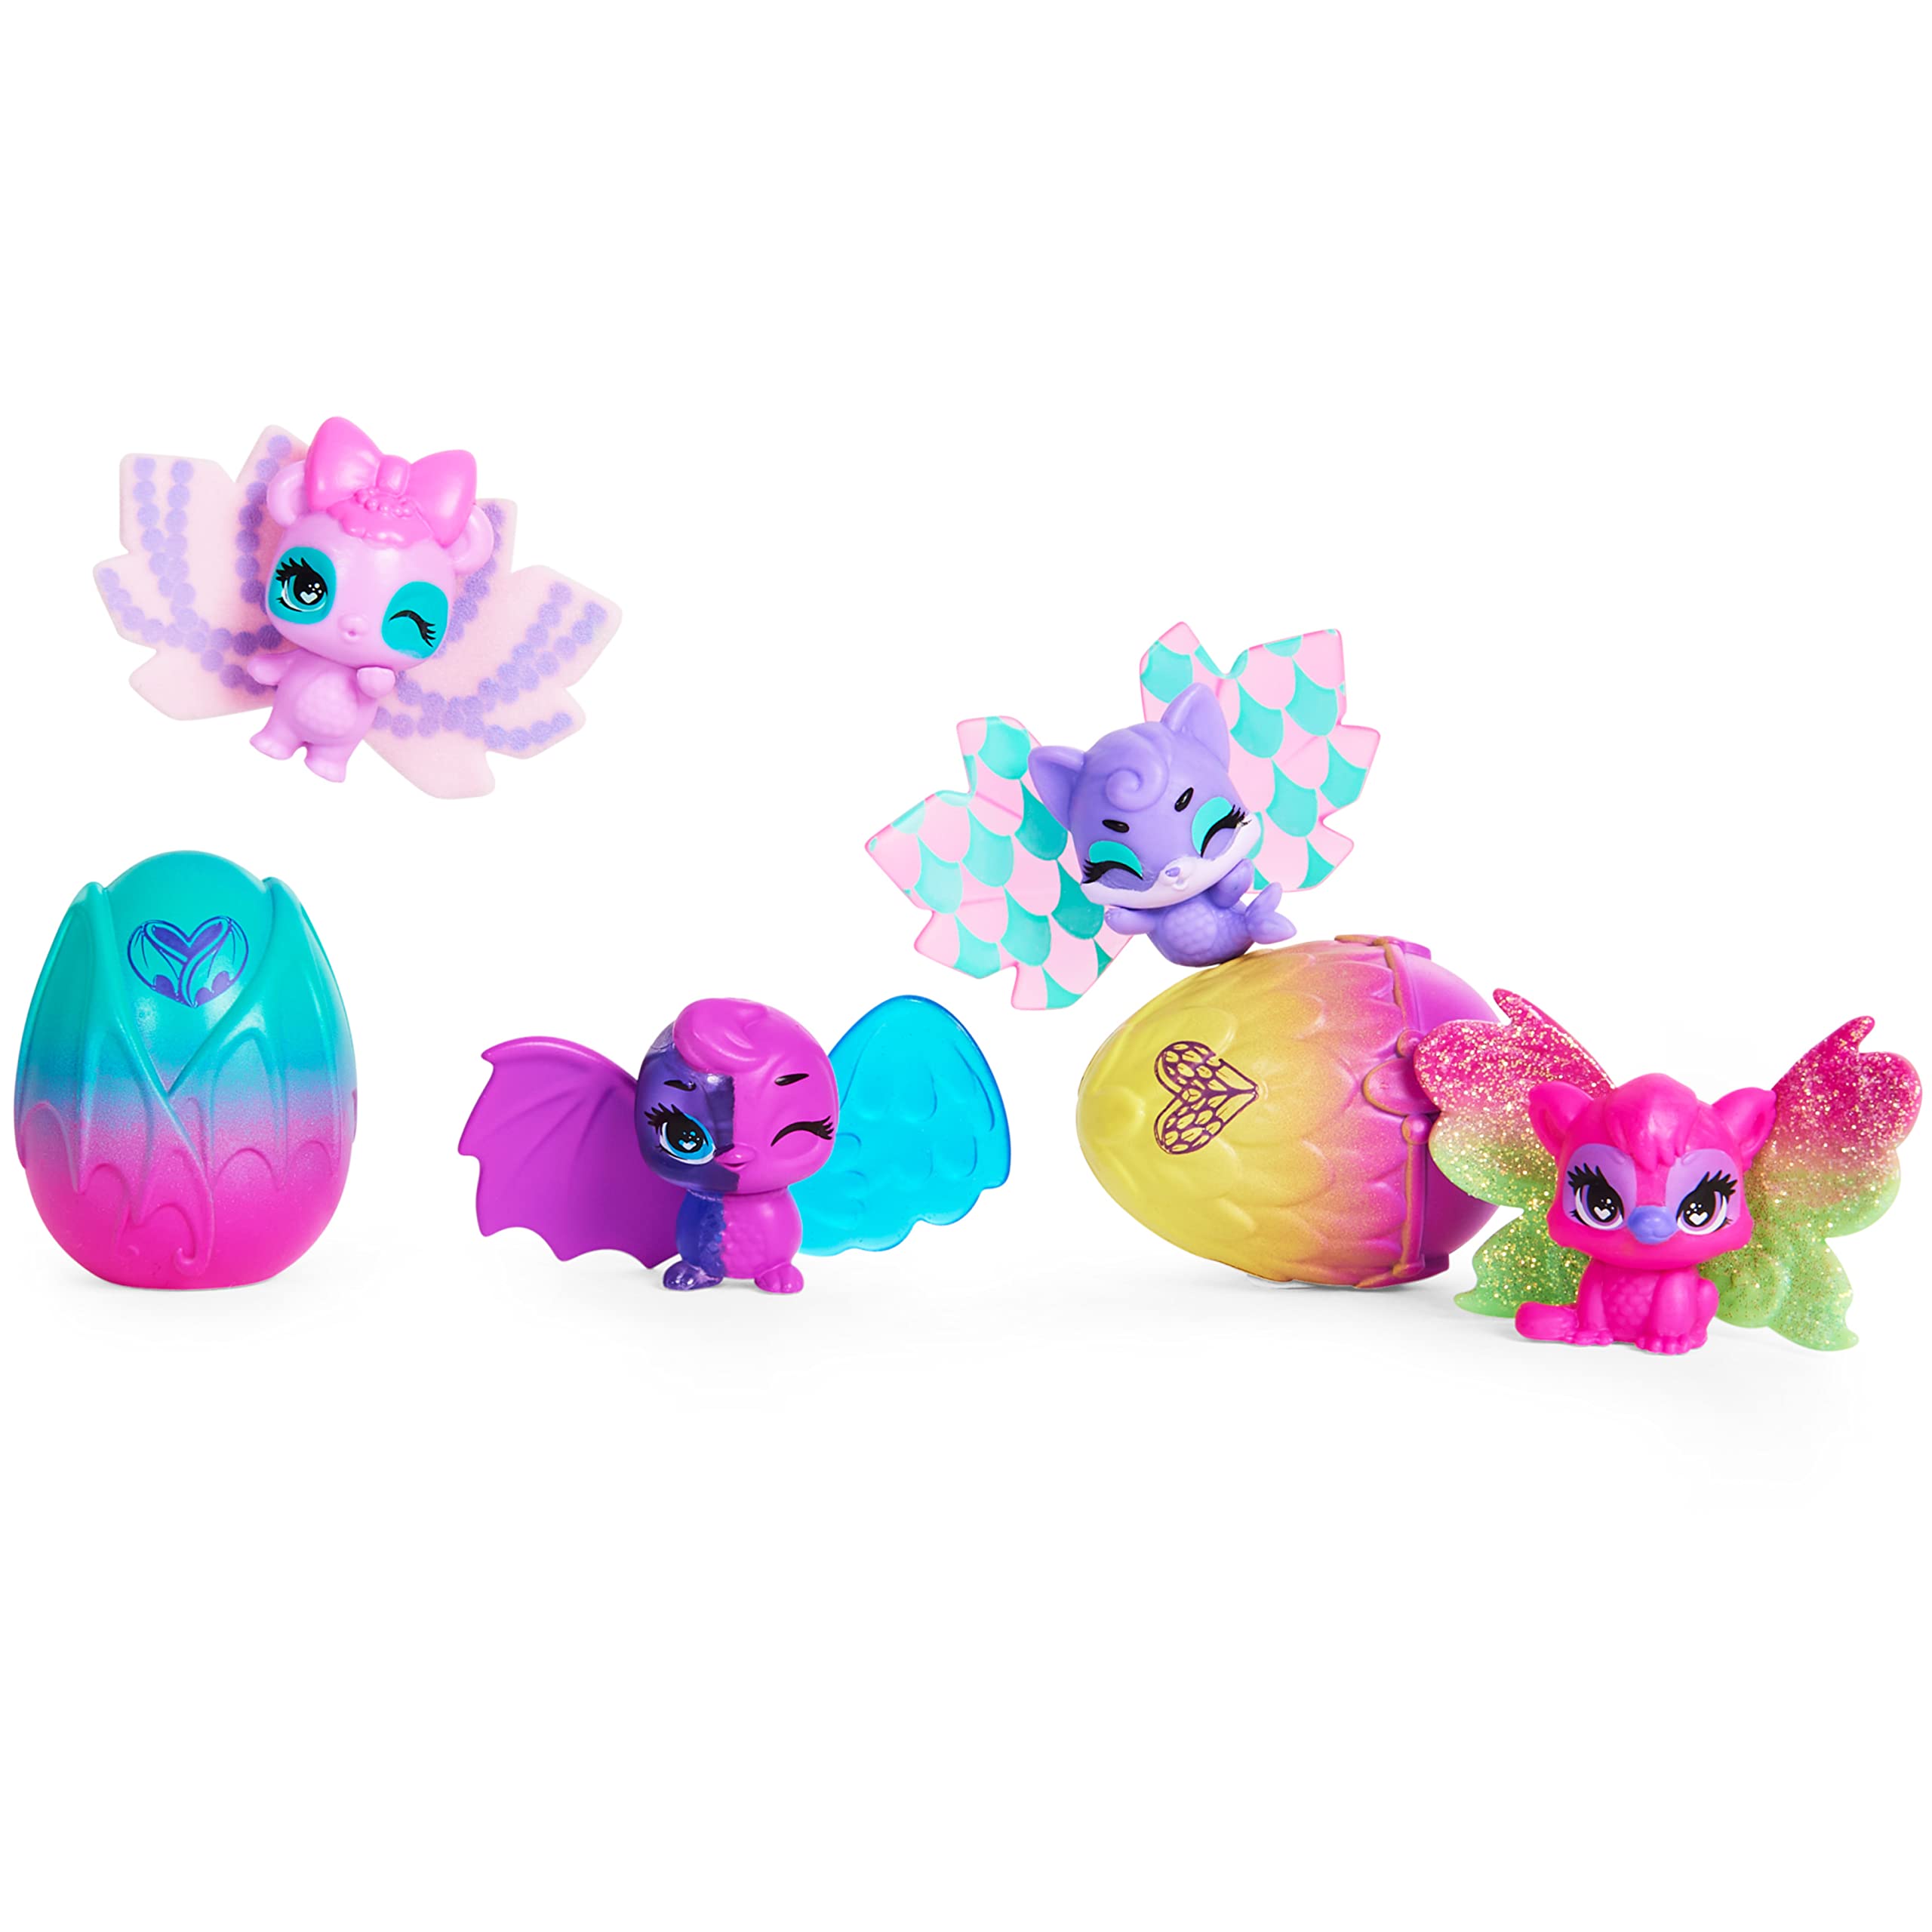 Hatchimals CollEGGtibles, Wilder Wings 12-Pack with Mix and Match Wings, Kids Toys for Girls Ages 5 and up